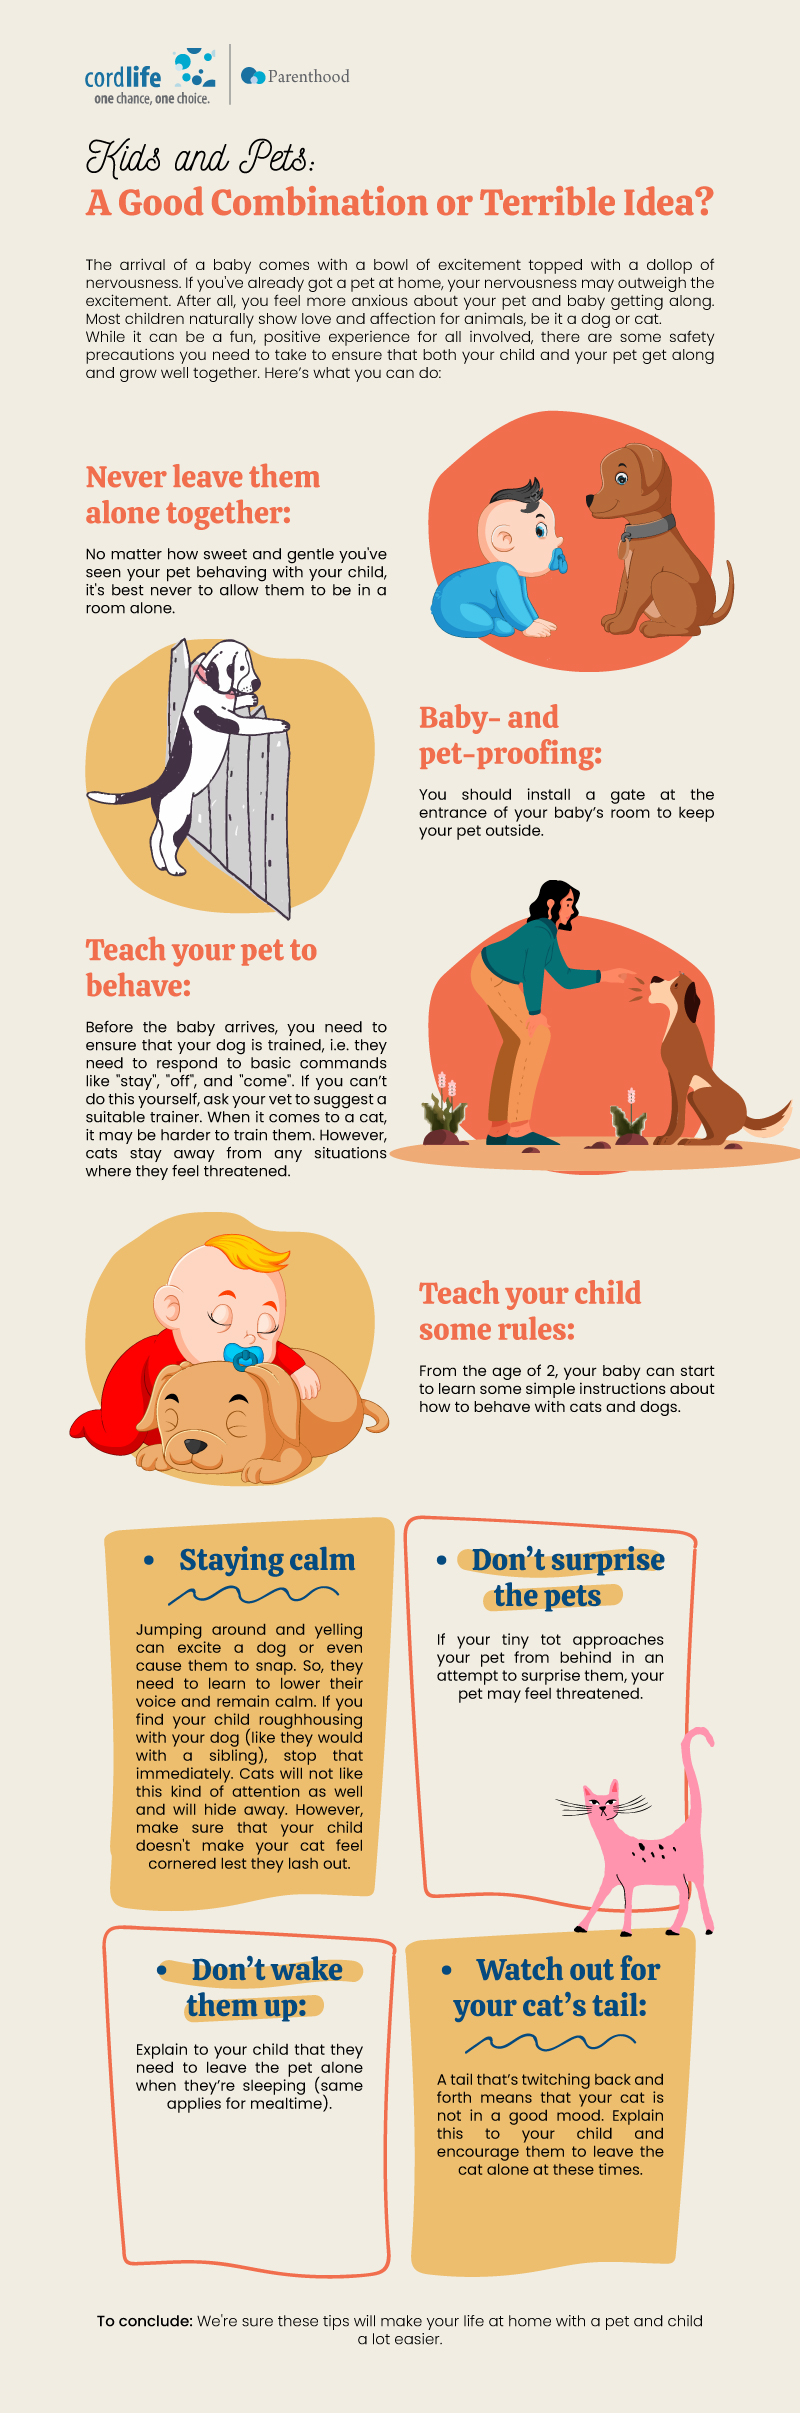 Kids and Pets - A Good Combination or Terrible Idea